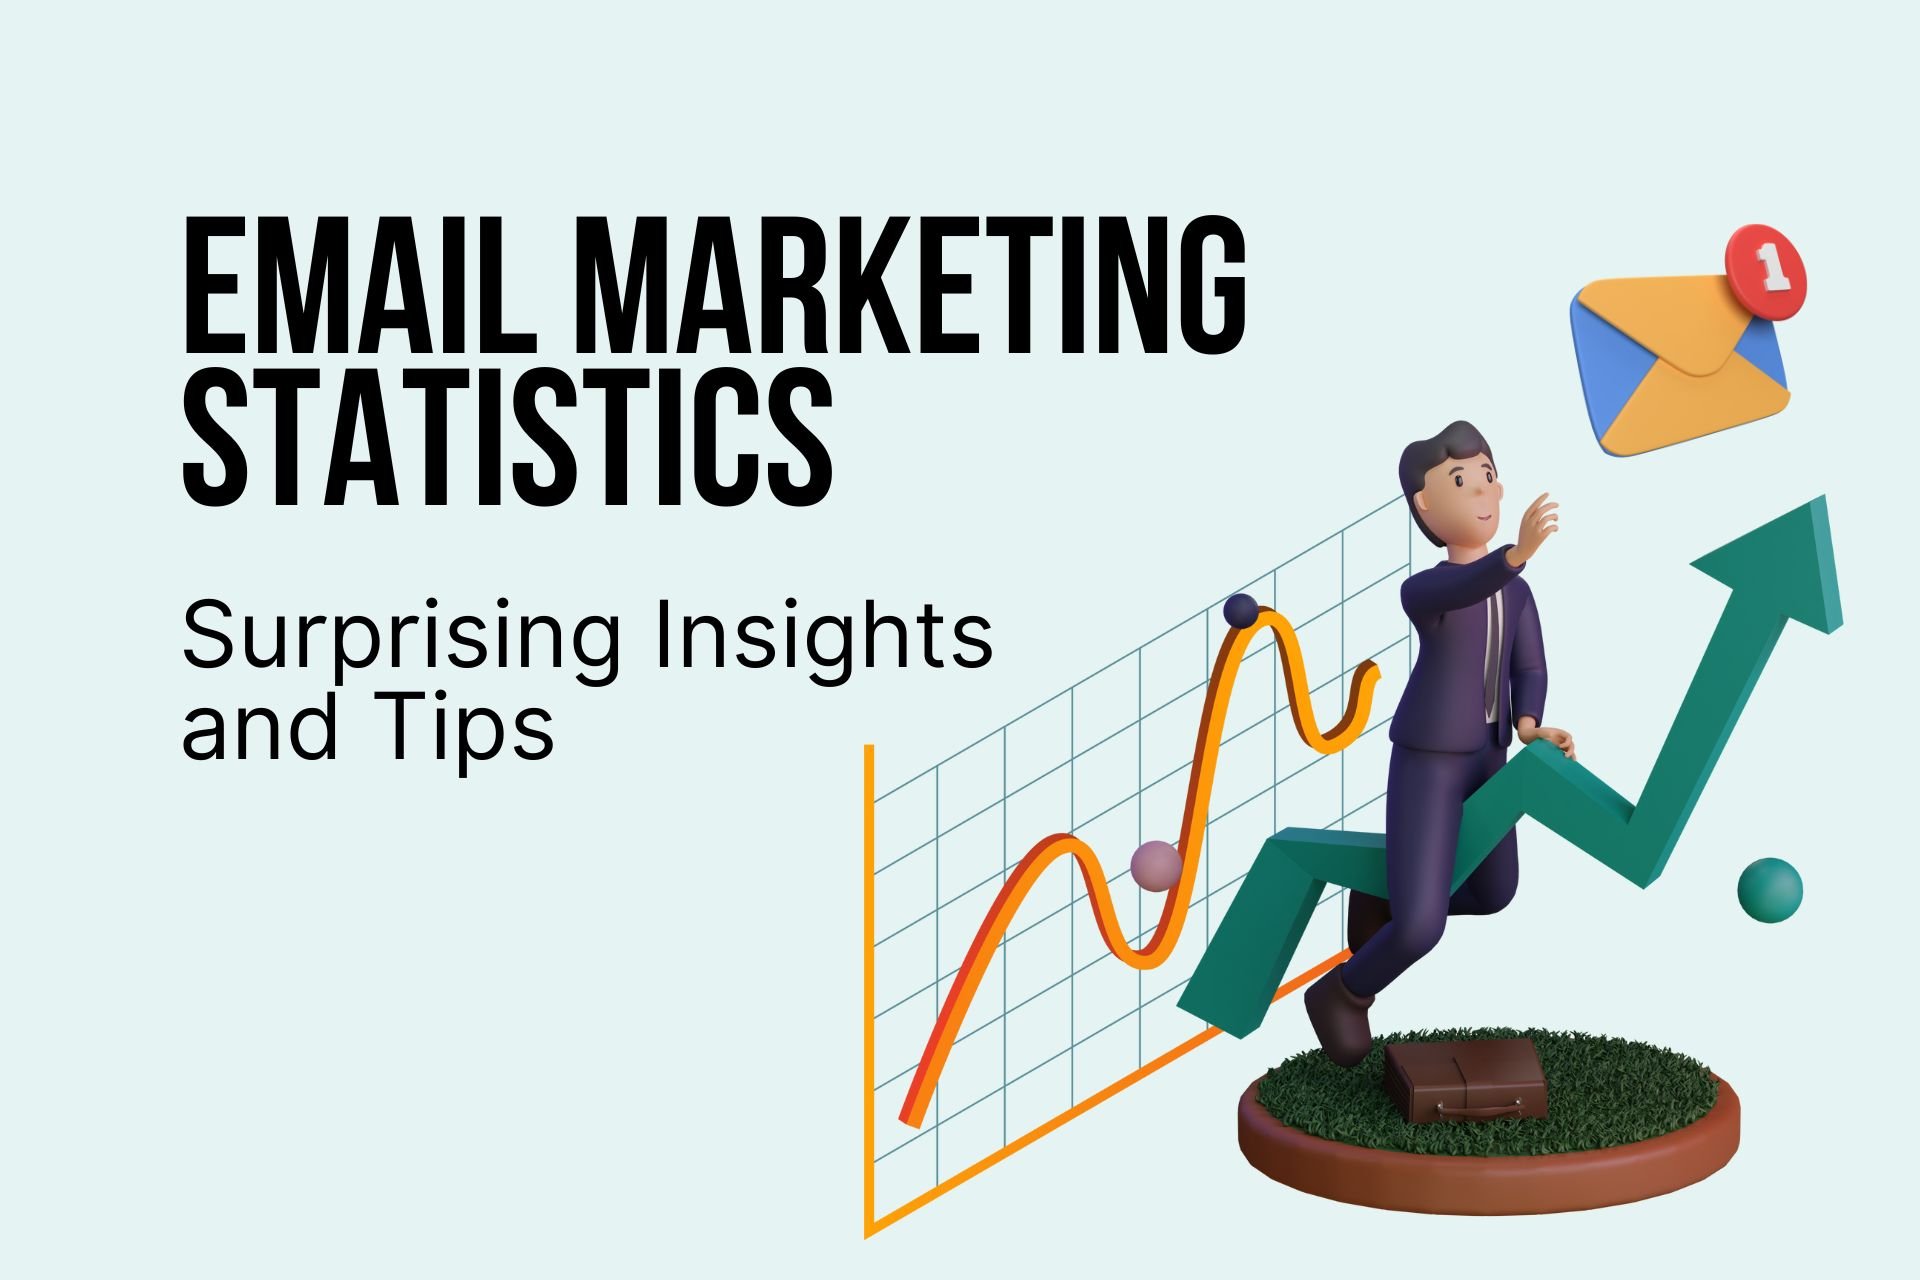 impressive facts about email marketing neil patel email marketing tips a girl stands with video icon an open envelop a scheme showing increase in email marketing results